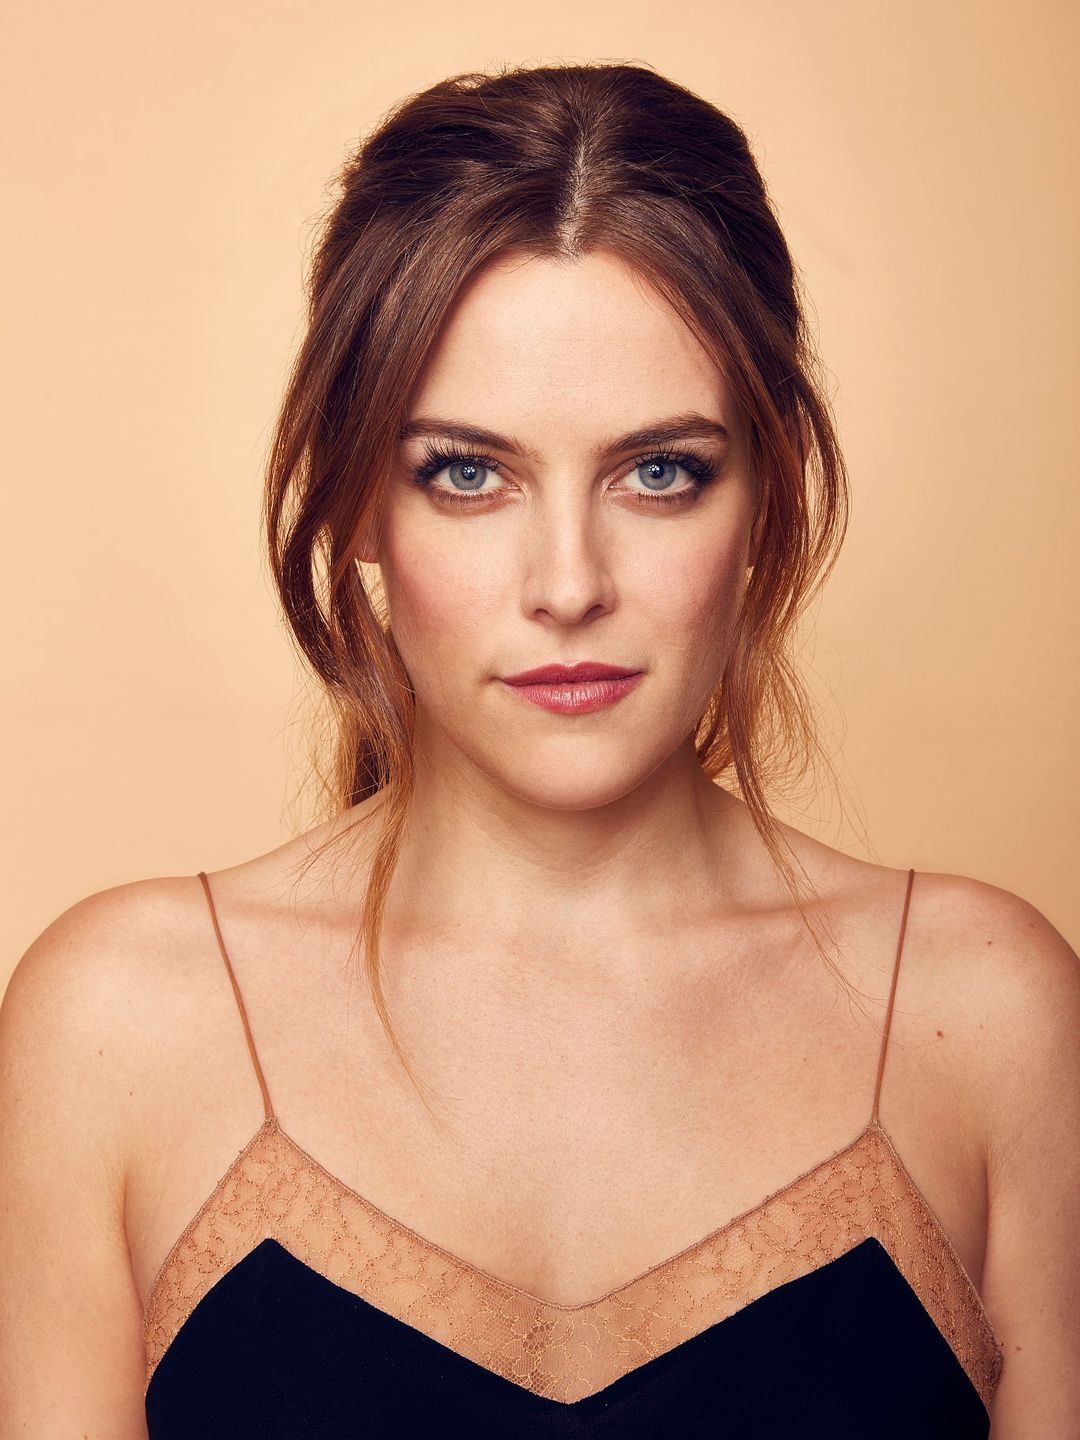 Riley Keough who are her parents